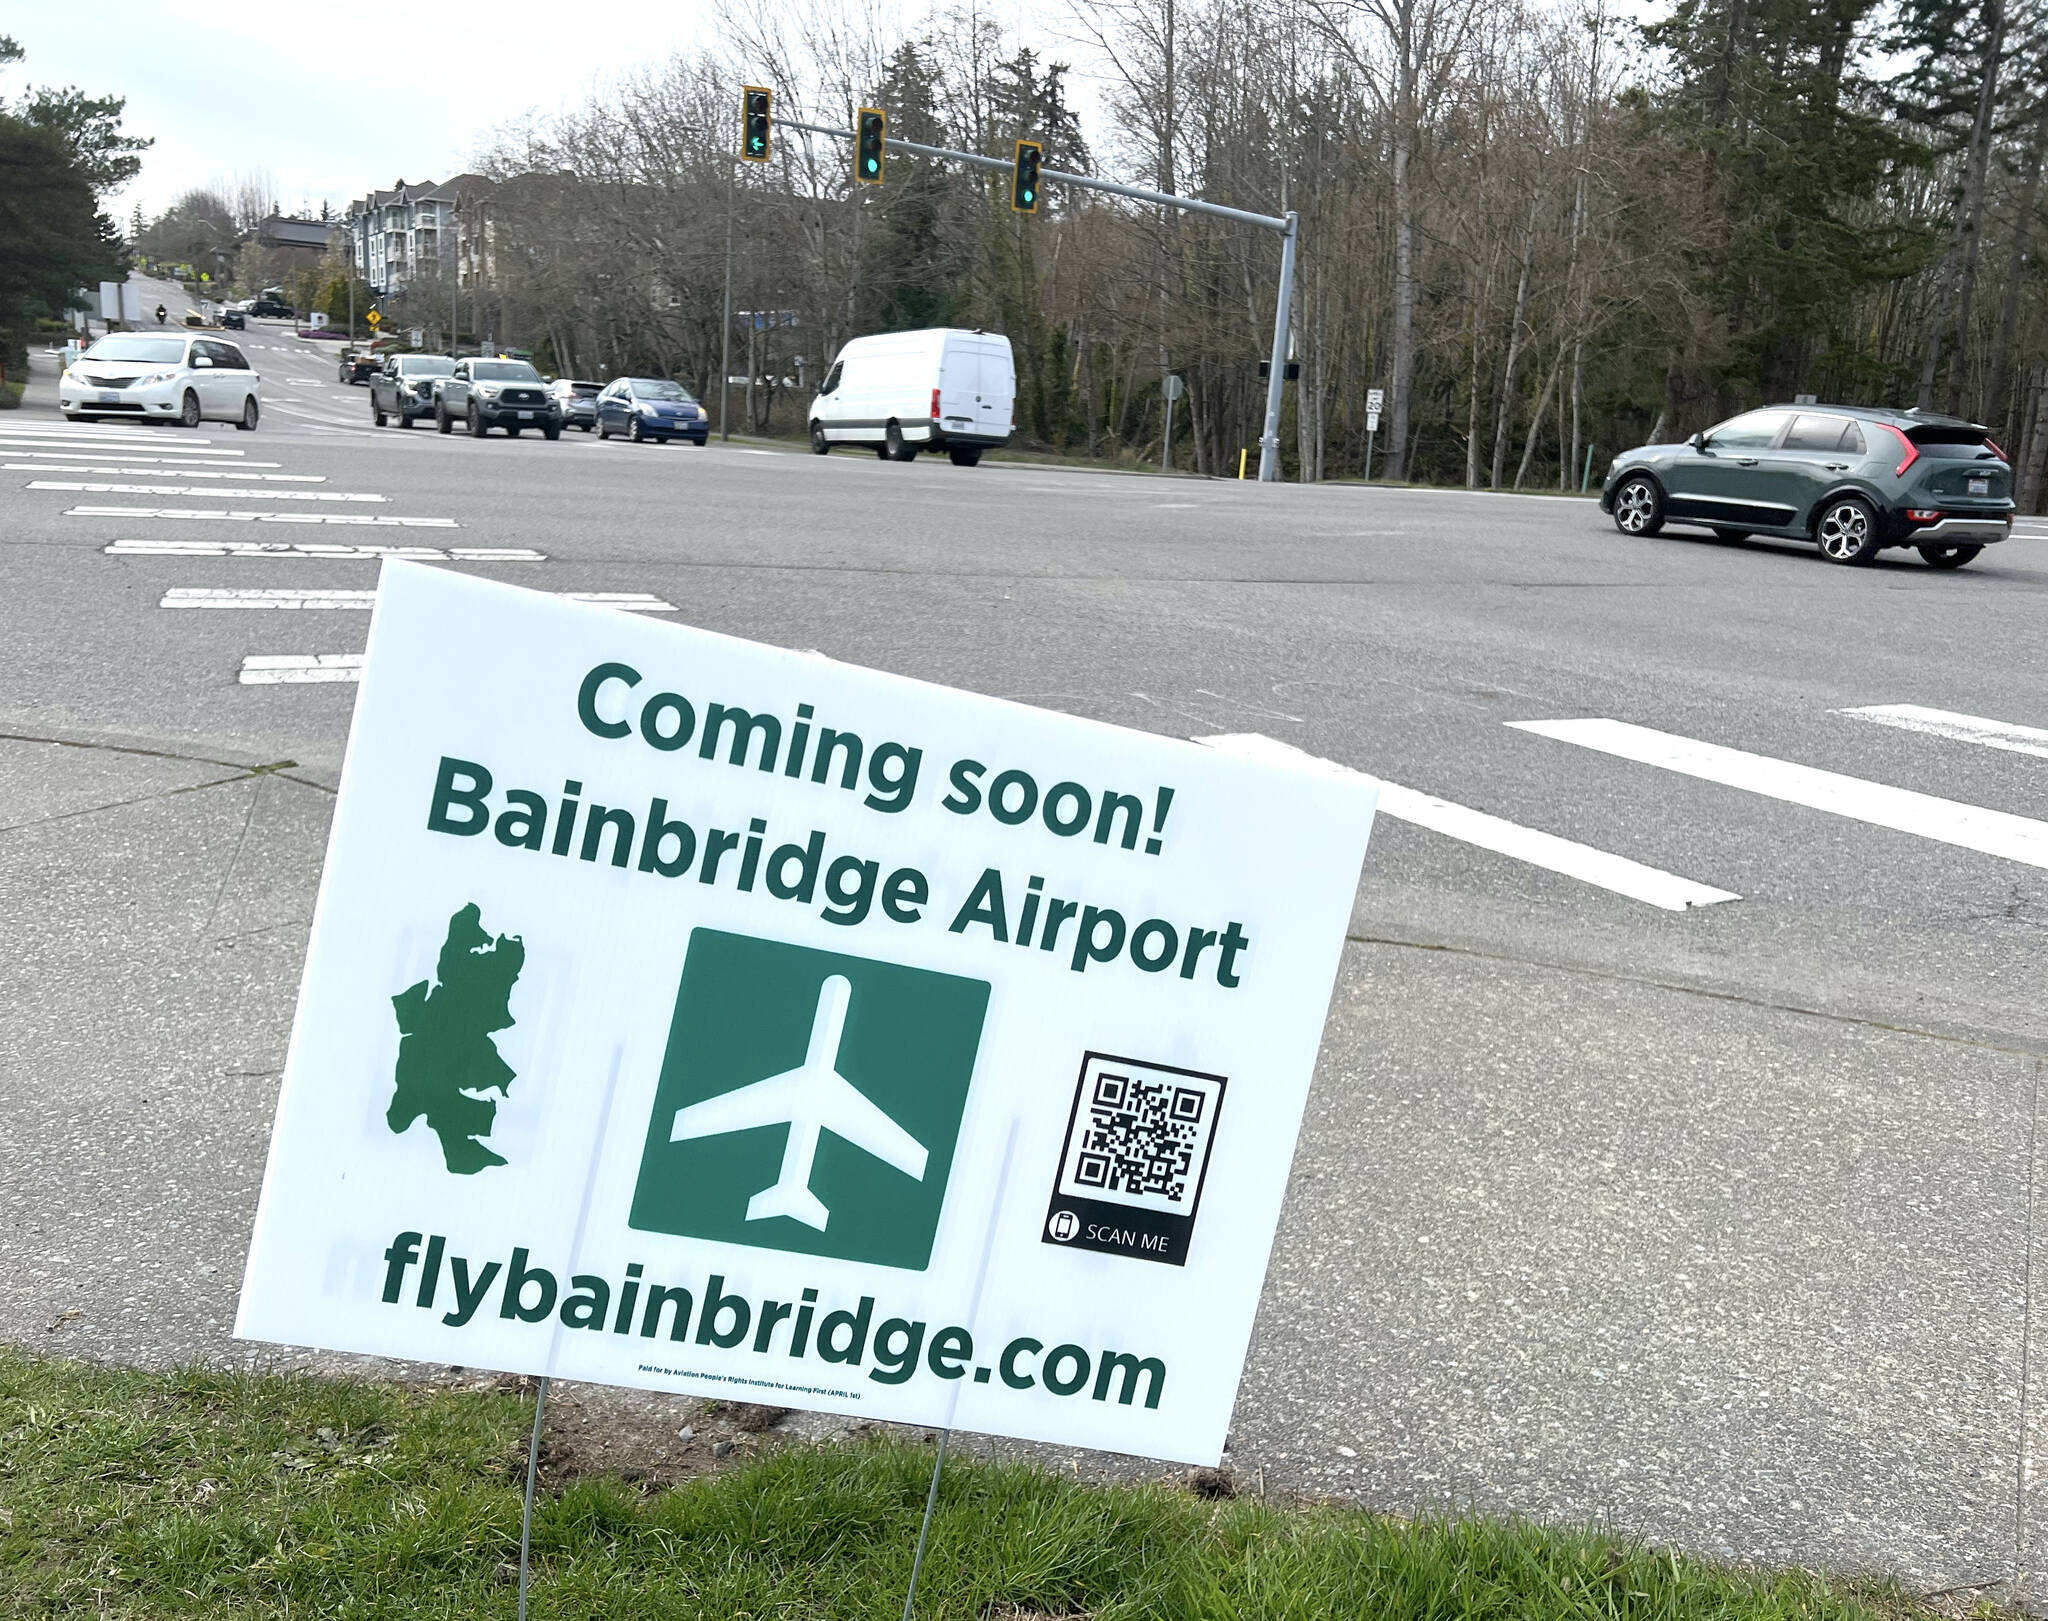 Signs about a new Bainbridge Airport appeared around the island April 1, advertising five-minute flights to Seattle instead of waiting in the ferry line. Don’t get too excited, it was part of an annual April Fools Day joke and not true. Learn more at flybainbridge.com. Another joke publicized an underwater tunnel between BI and Seattle. Nancy Treder/Kitsap News Group